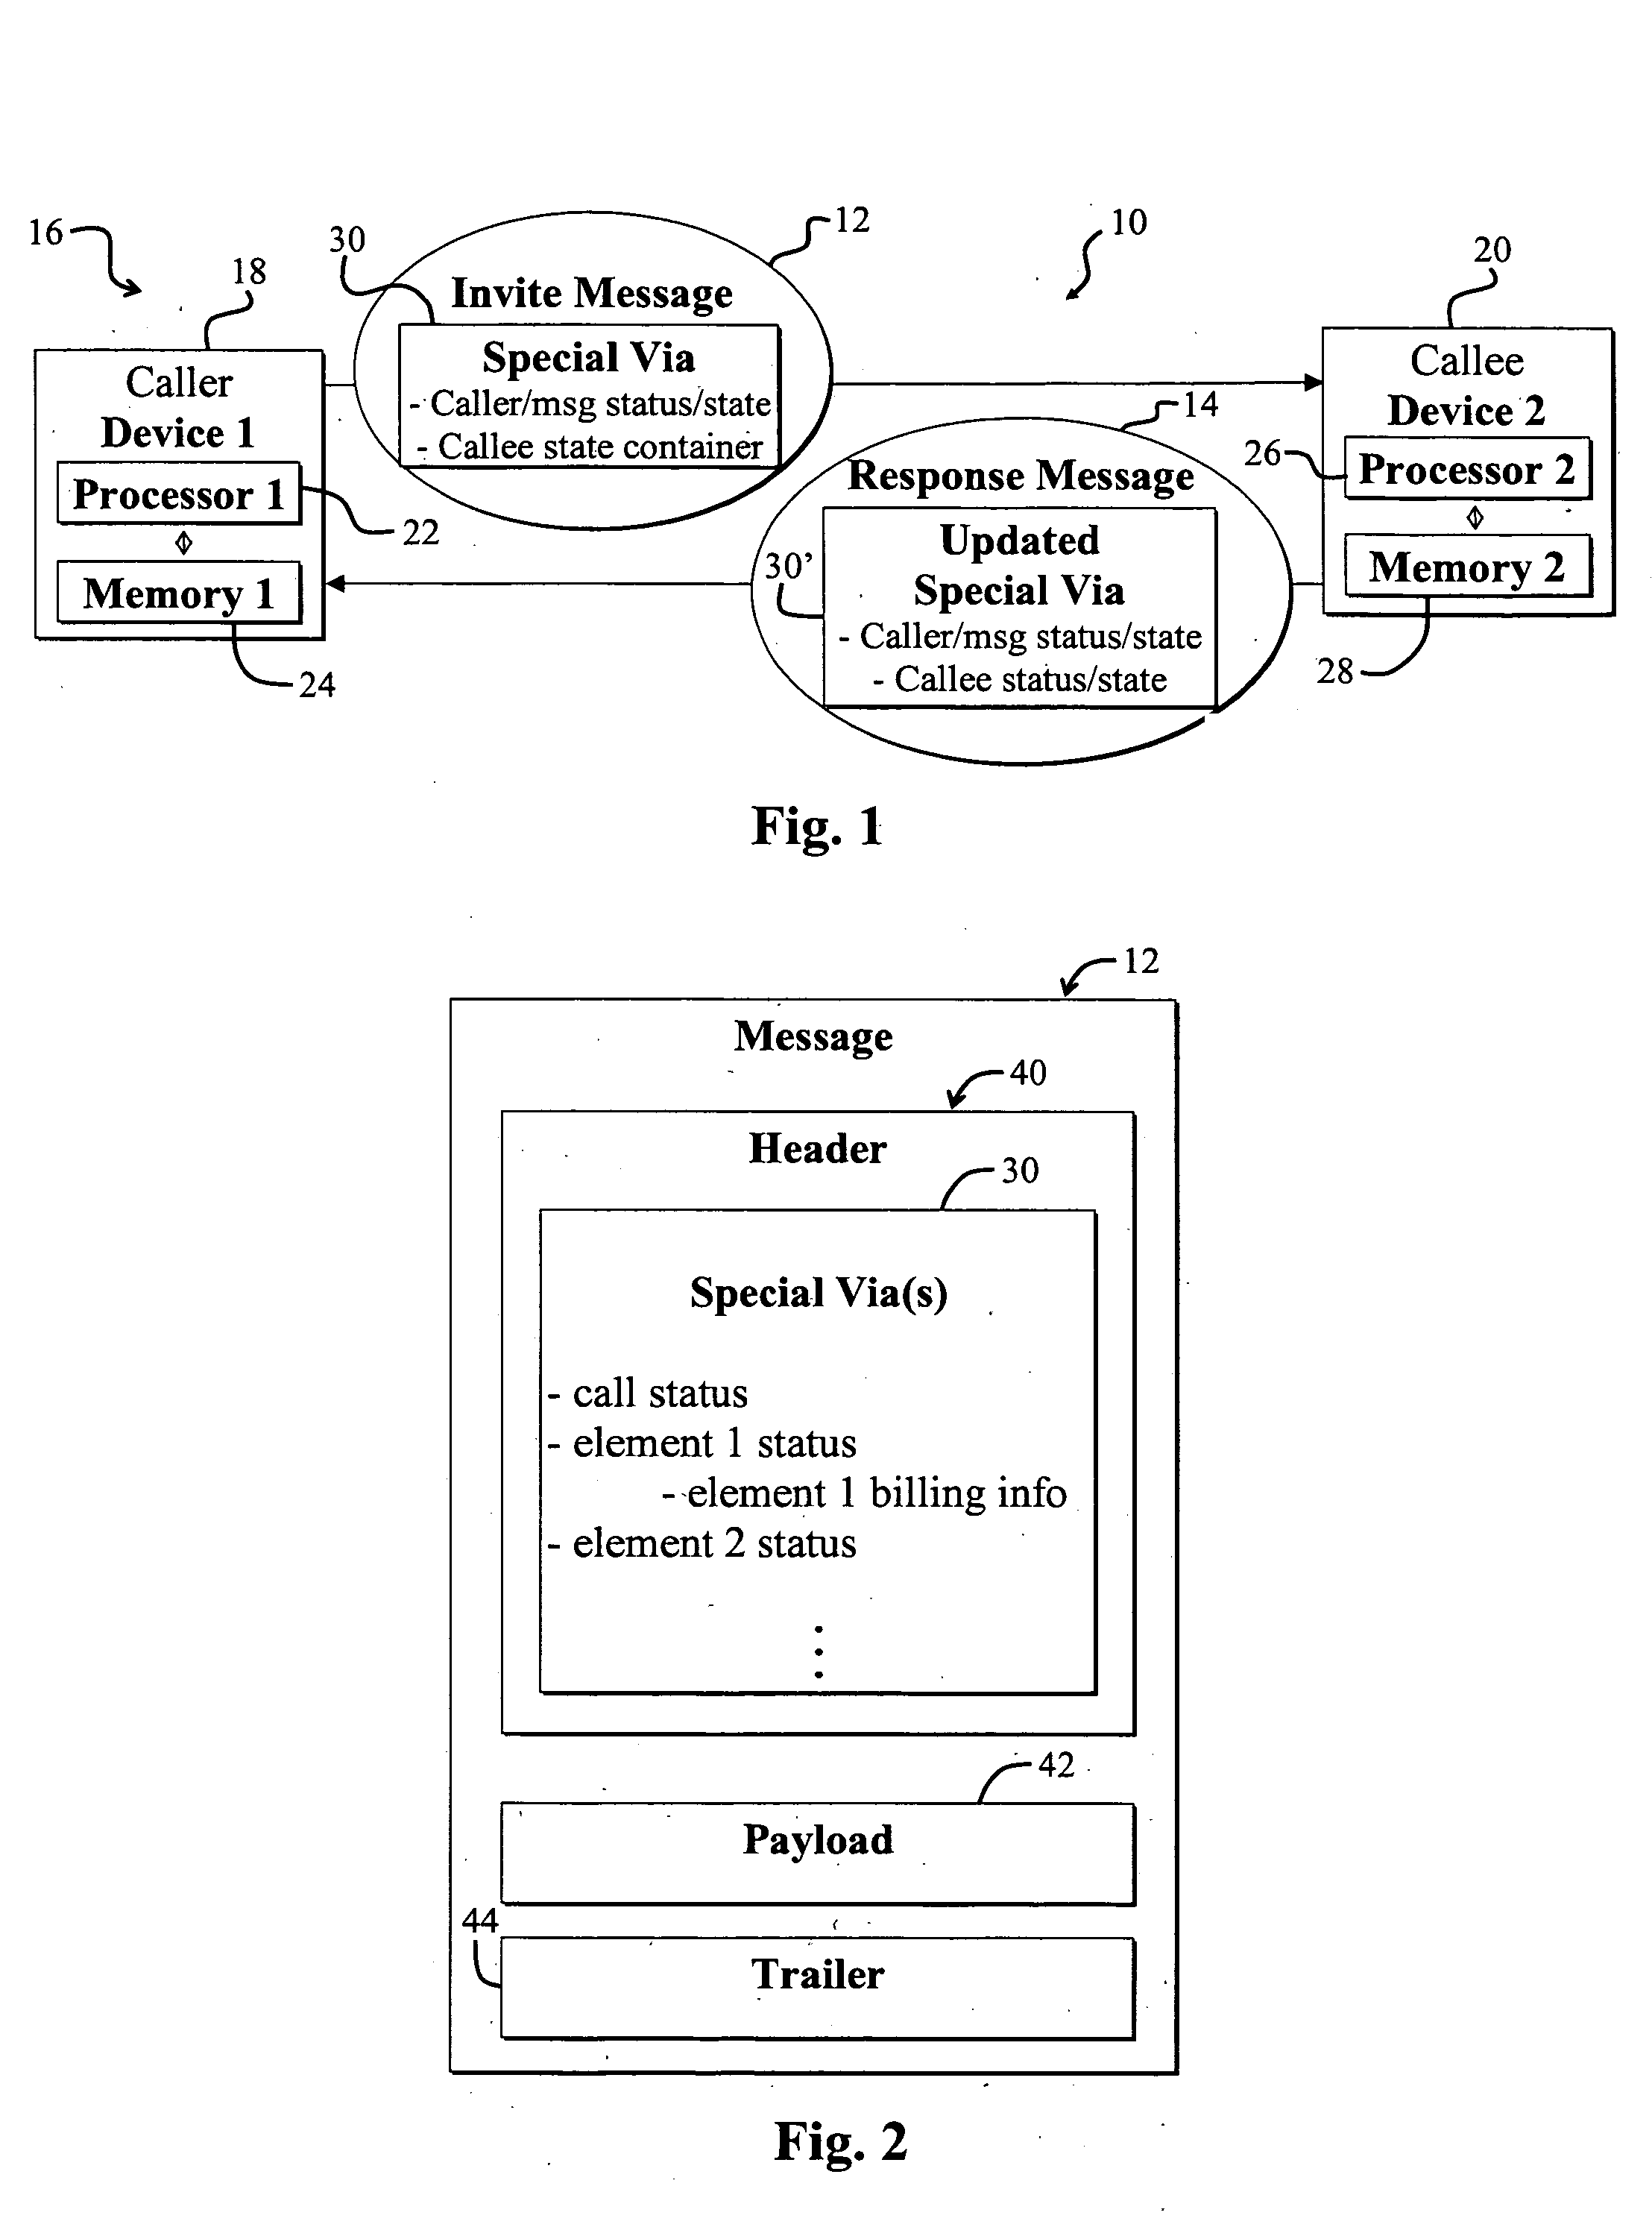 Transferring state information in a network